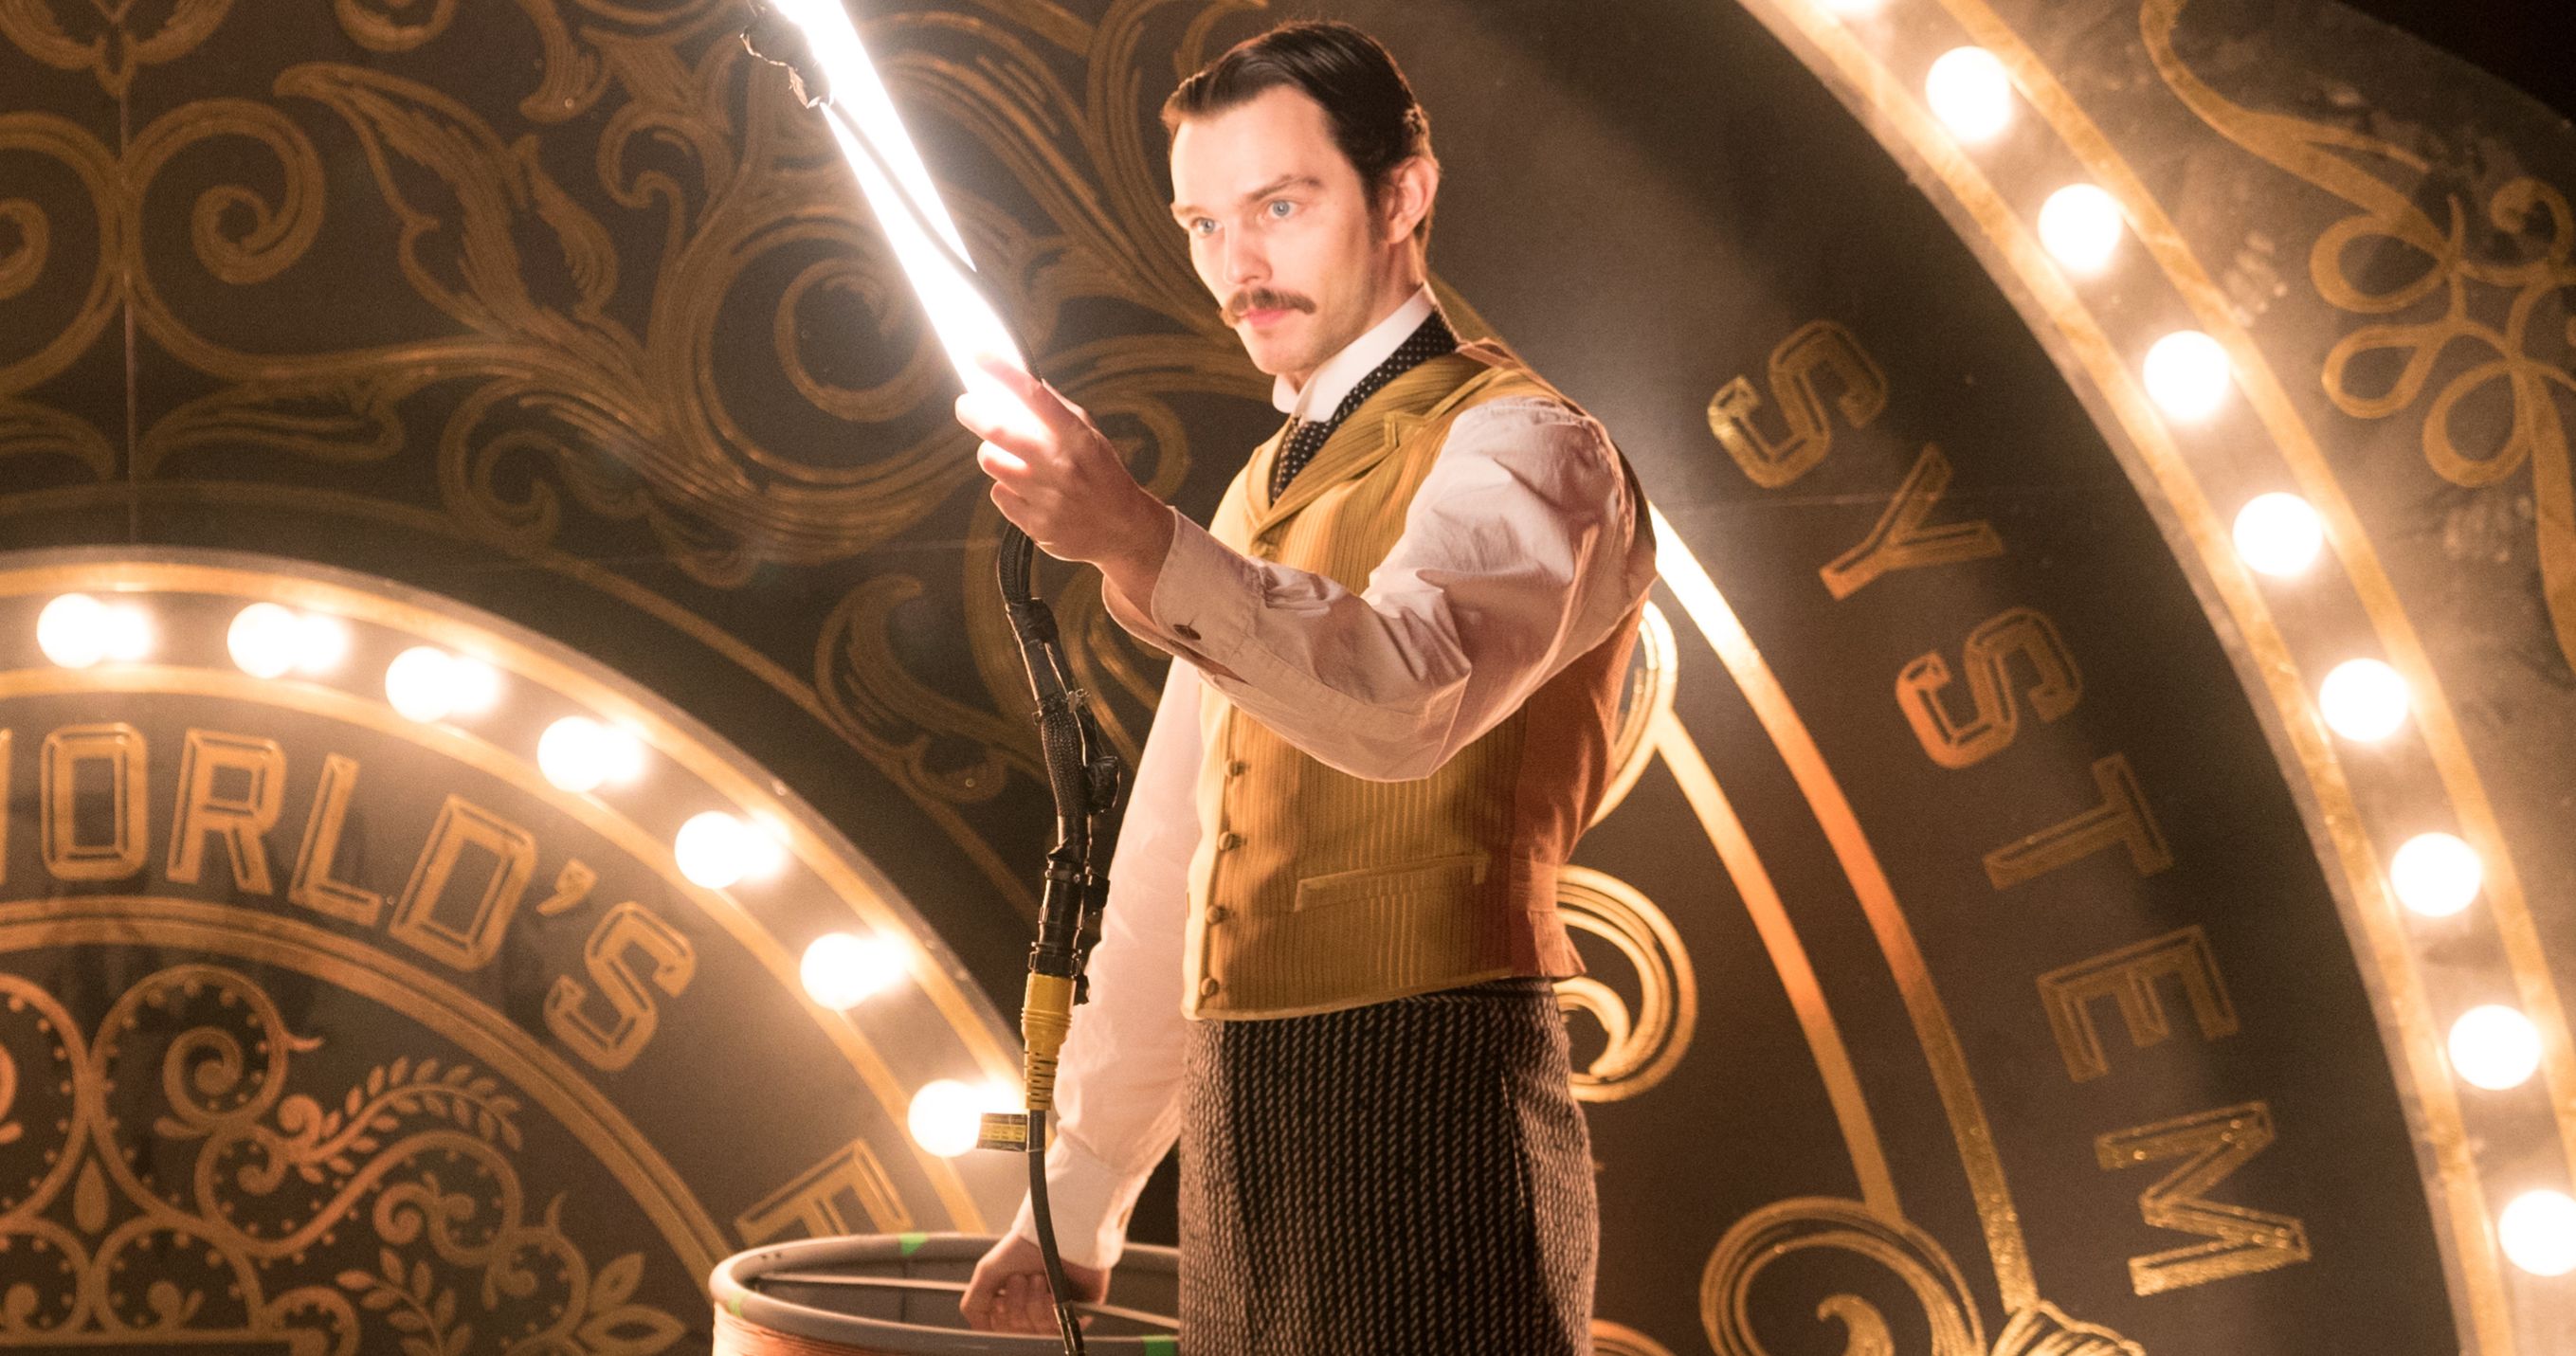 The Current War Trailer #2: Benedict Cumberbatch Lights Up the World as Thomas Edison